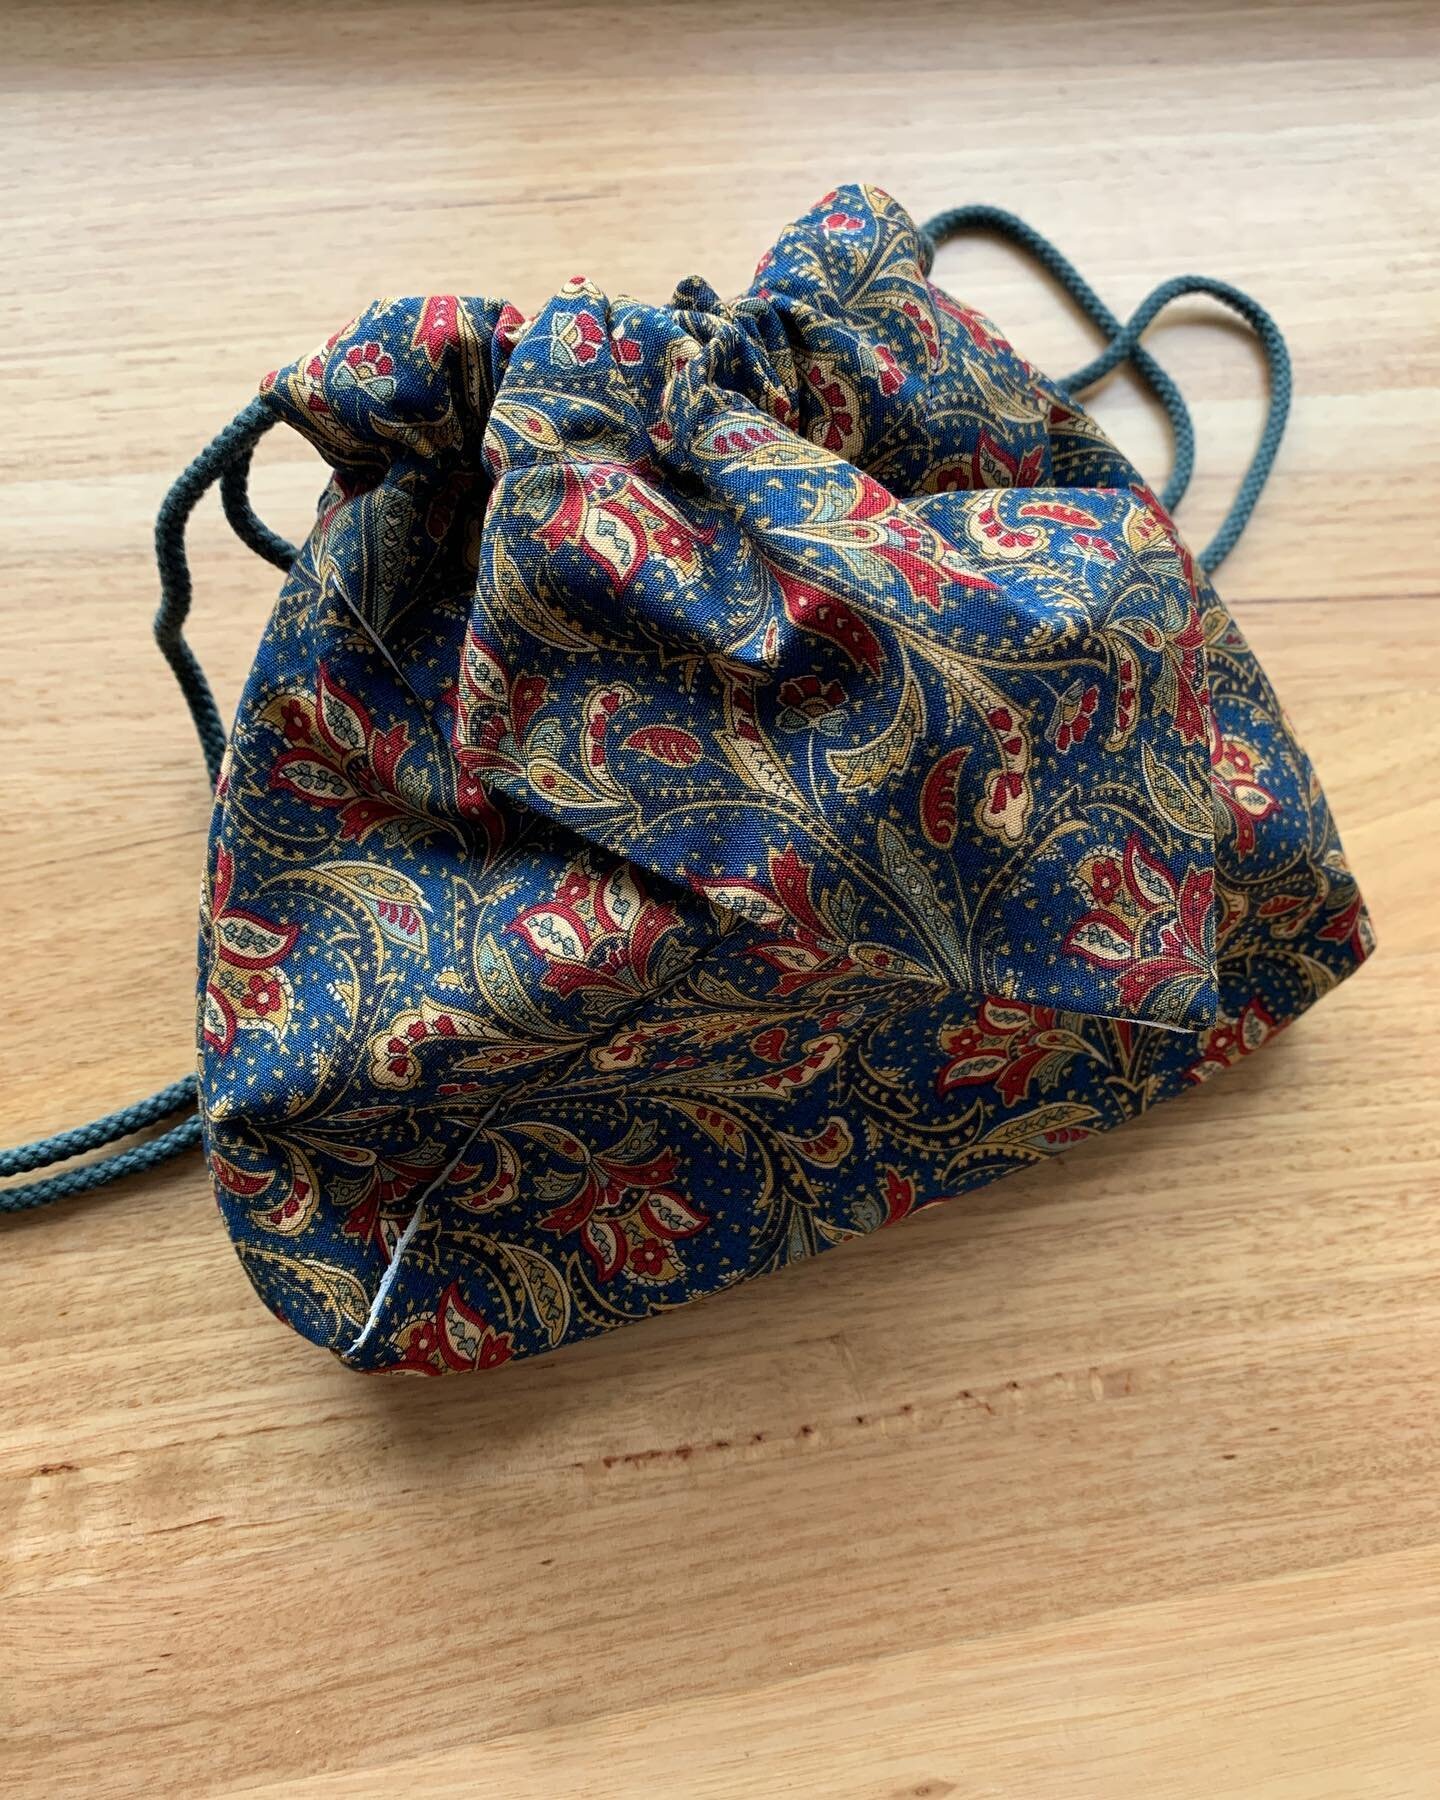 Two lovely pouches that could be used for a range of items!  The drawstring pouch has two exterior pockets.  The pencil sized pouch has been designed to make the most of left over fabrics from other projects. 

A great little present. 

$20 for the p